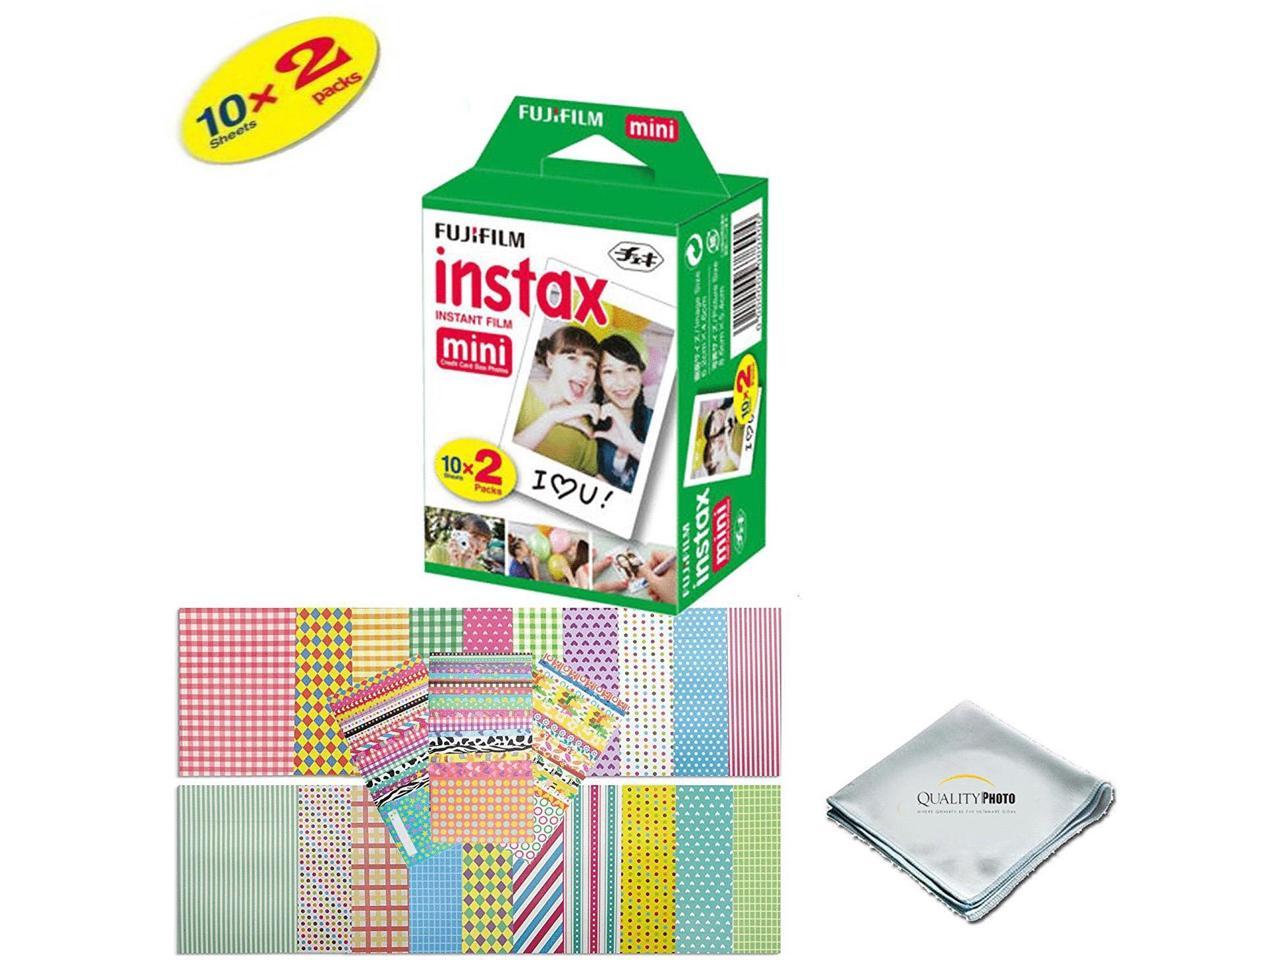 Fujifilm INSTAX Mini Instant Film 2 Pack - 20 SHEETS - (White) For Fujifilm Instax Mini 8 & Mini 9 Cameras + Frame Stickers and Microfiber Cloth Accessories